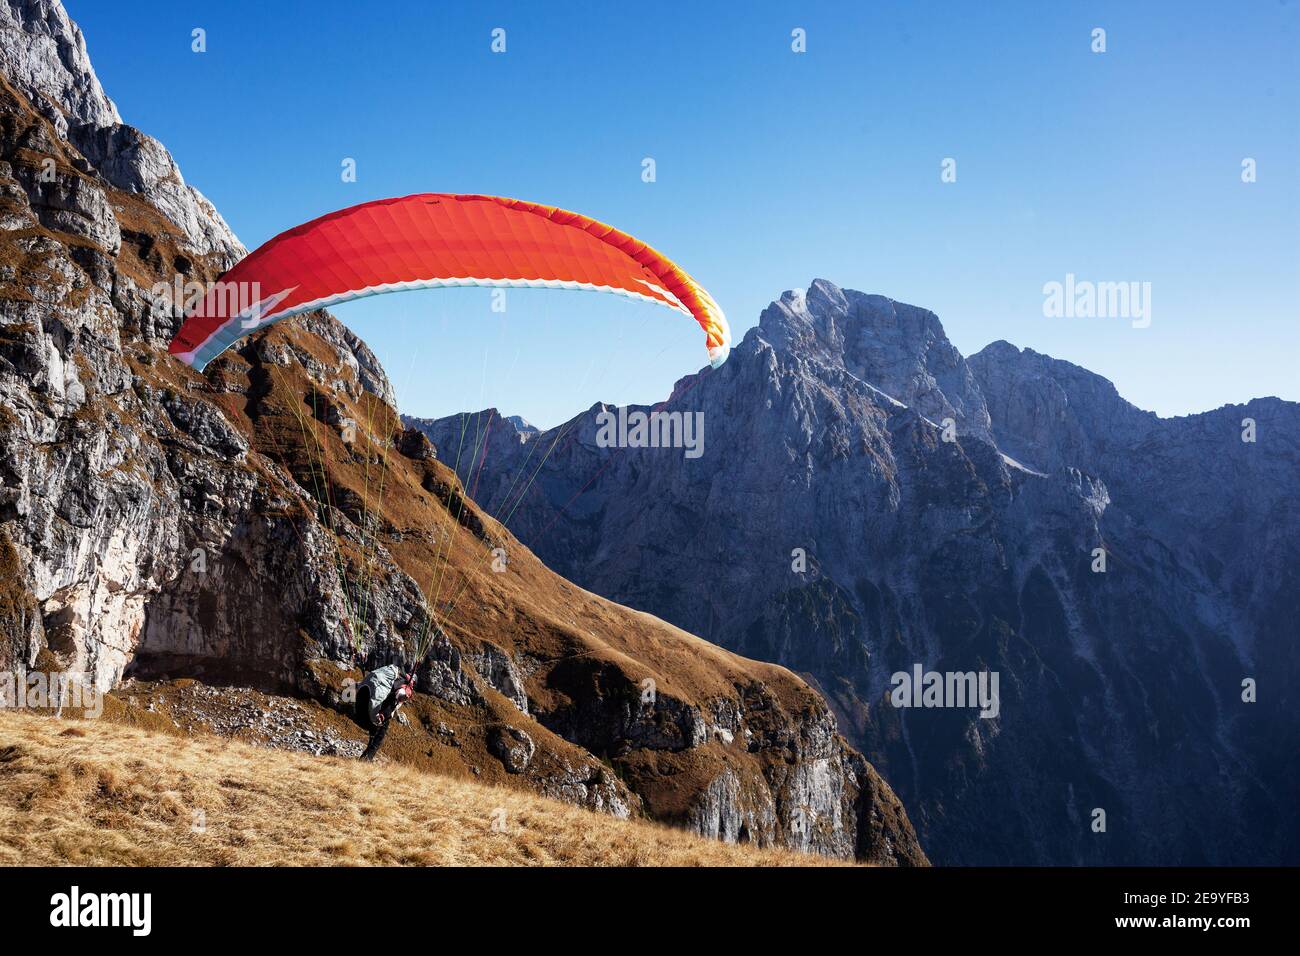 Paraglider with a red parachute taking off from a mountain meadow among the surrounding mountains with Jalovec in the foreground. Stock Photo